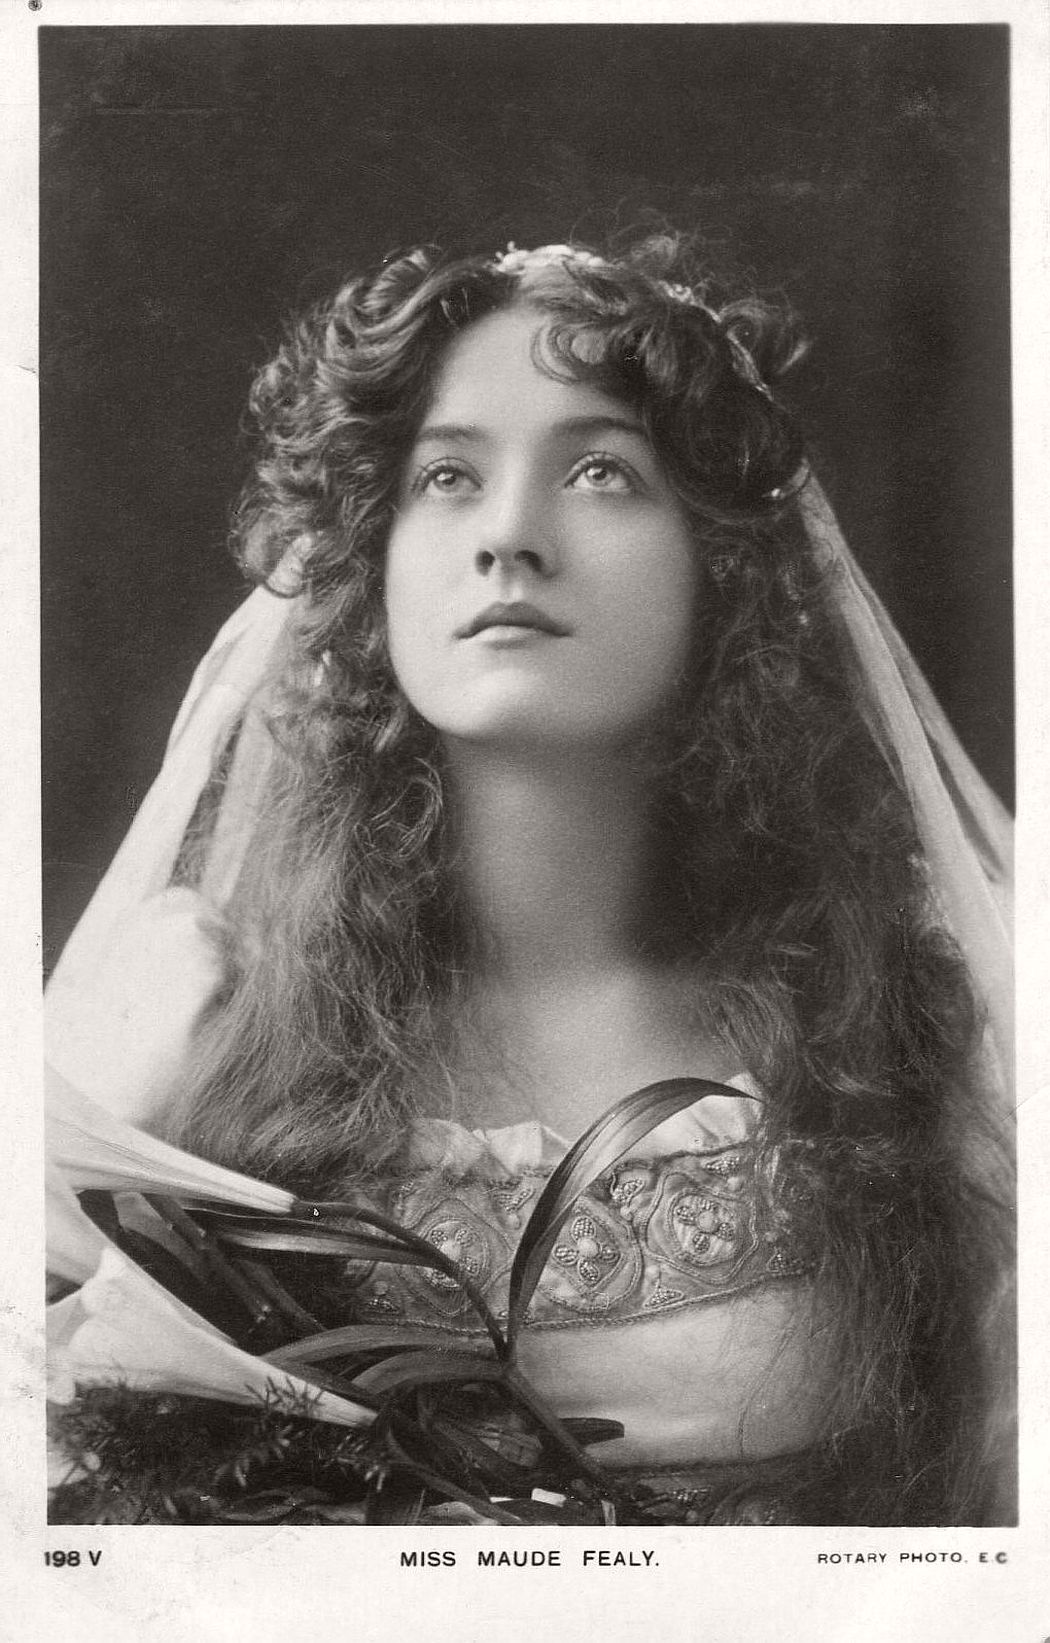 vintage-postcard-of-actress-miss-maude-fealy-1900s-early-xx-century-22